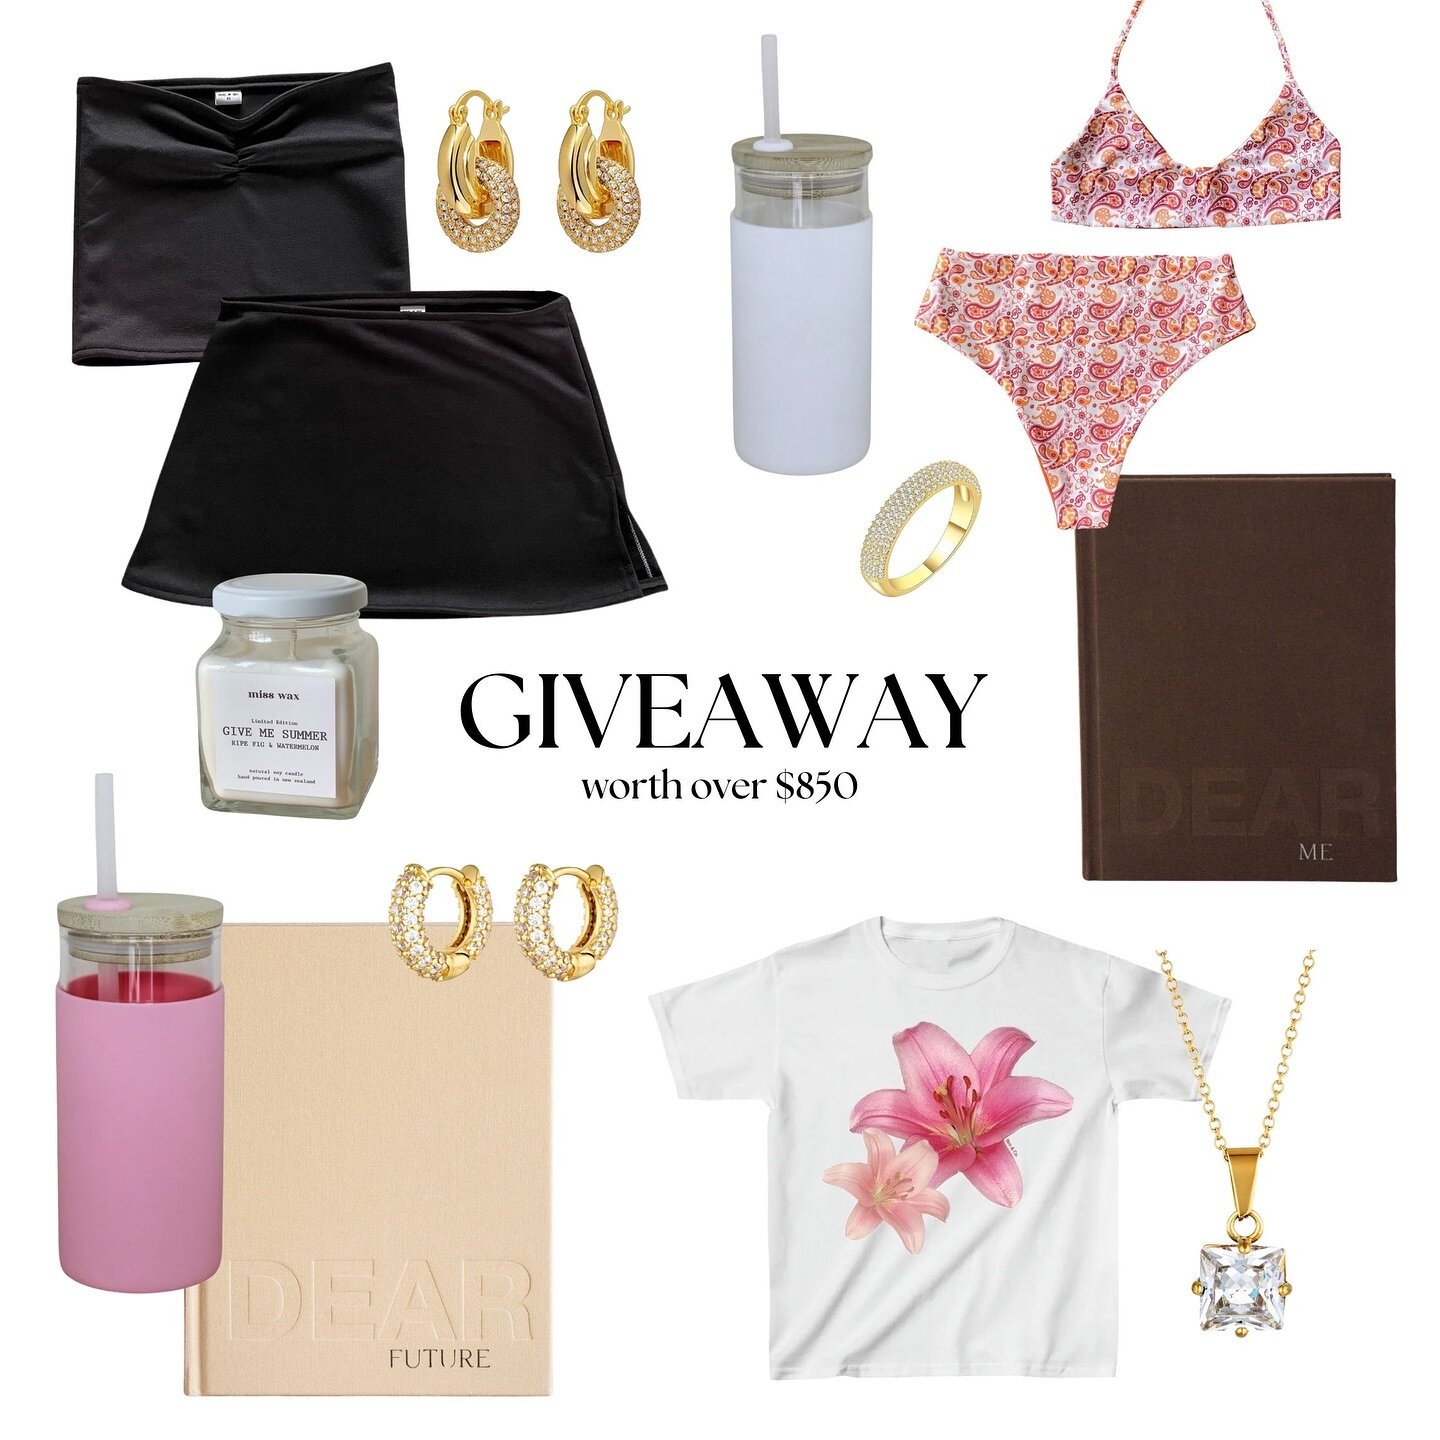 💗🤍 GIVEAWAY 🤍💗

The early Christmas giveaway you have all been waiting for is here. Win over $850 worth of goodies from your favourite brands.

The prize includes 
$150 voucher from @studiozjewels 
$150 voucher from @_tydecollective 
$150 voucher